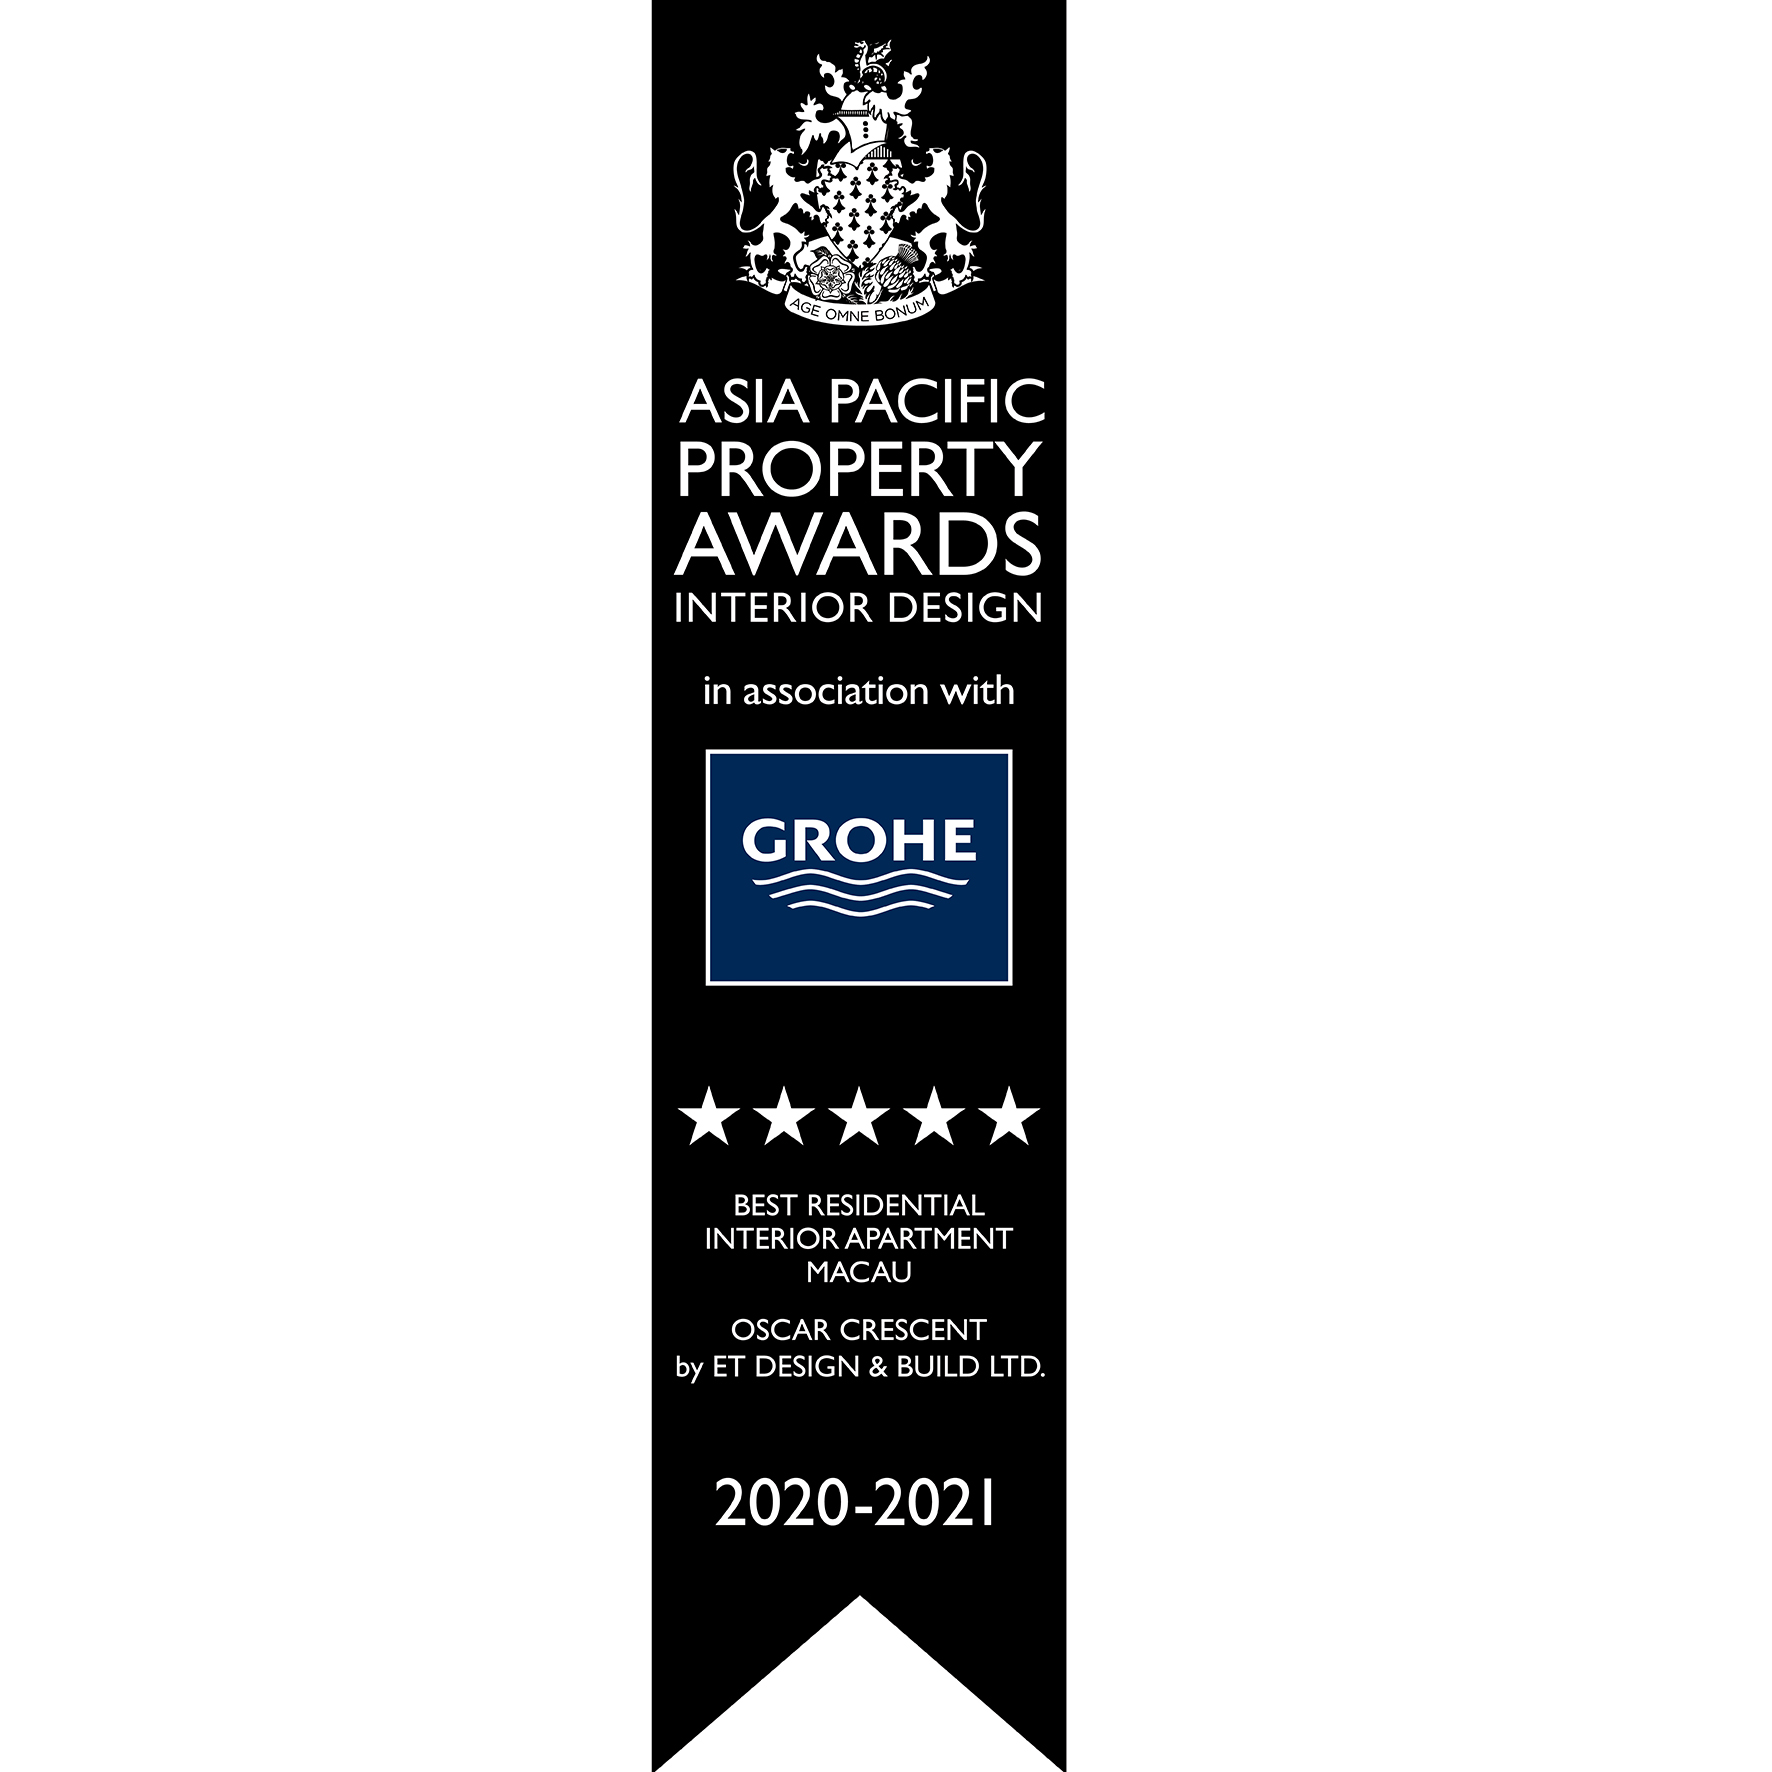 Asia Pacific Property Awards 2020-2021 Winners - Best (5 Stars) Residential Interior Apartment  category for Macau - Oscar Crescent